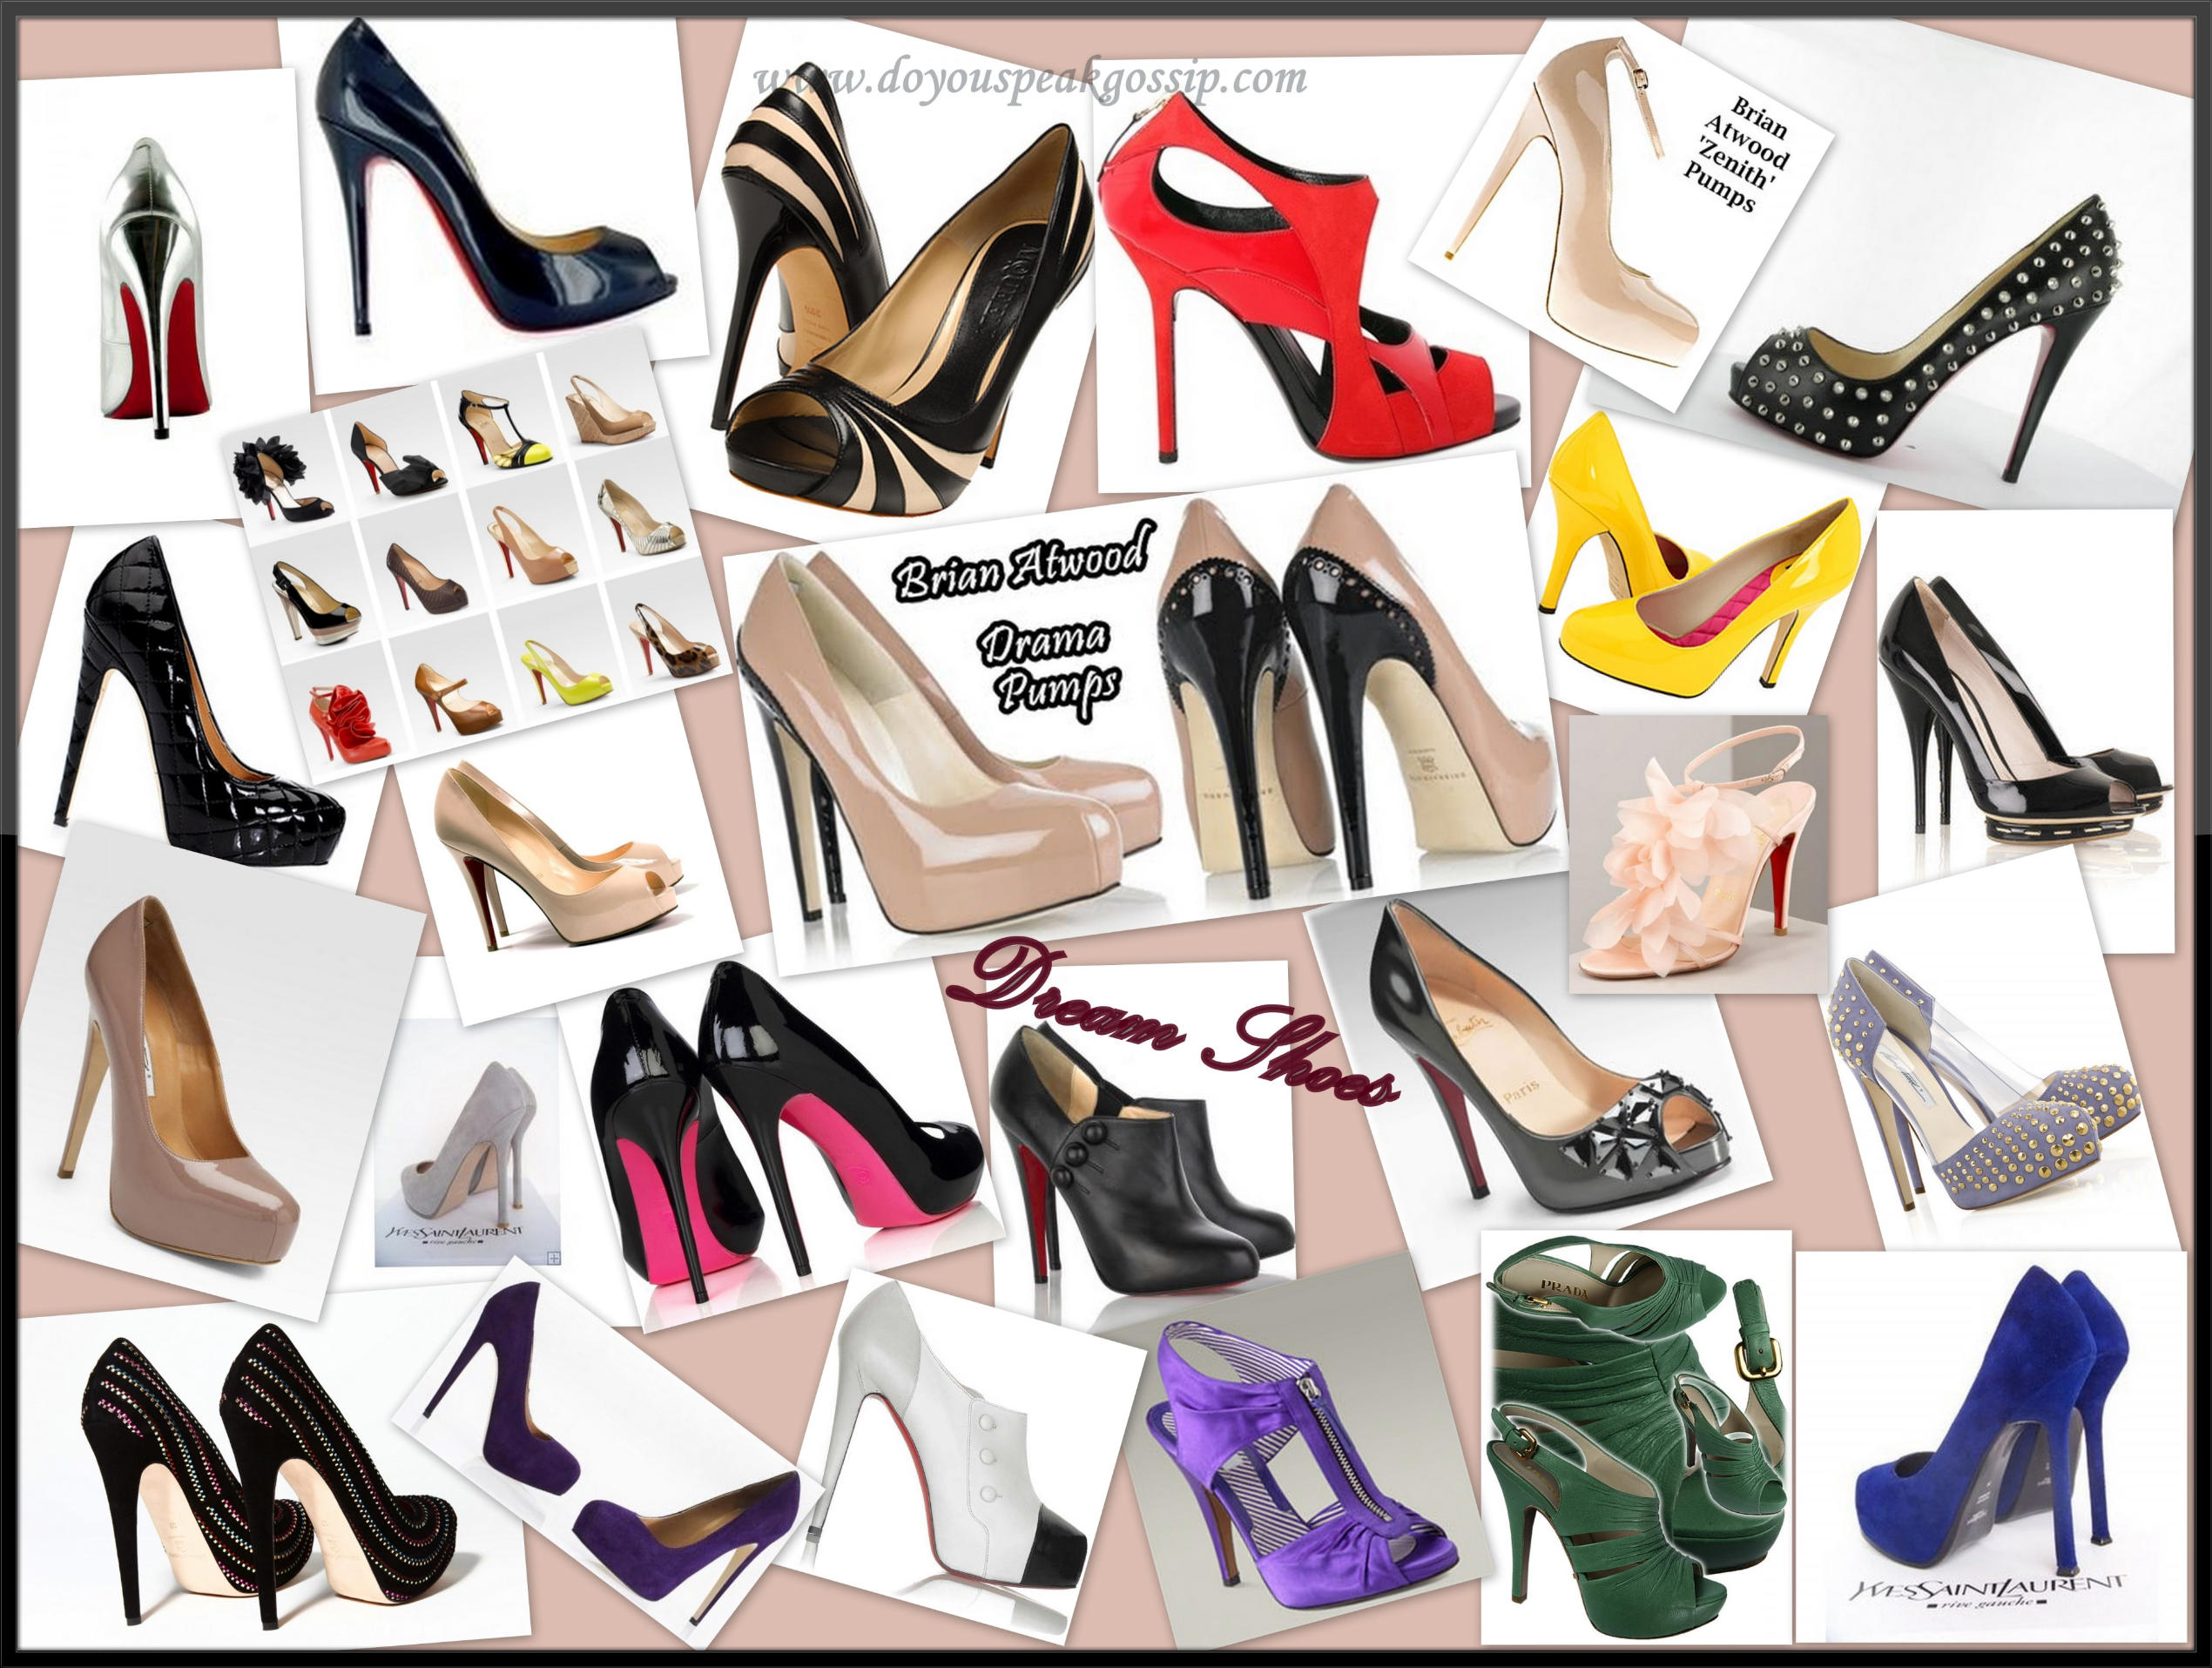 shoes collage Archives - Do You Speak Gossip?